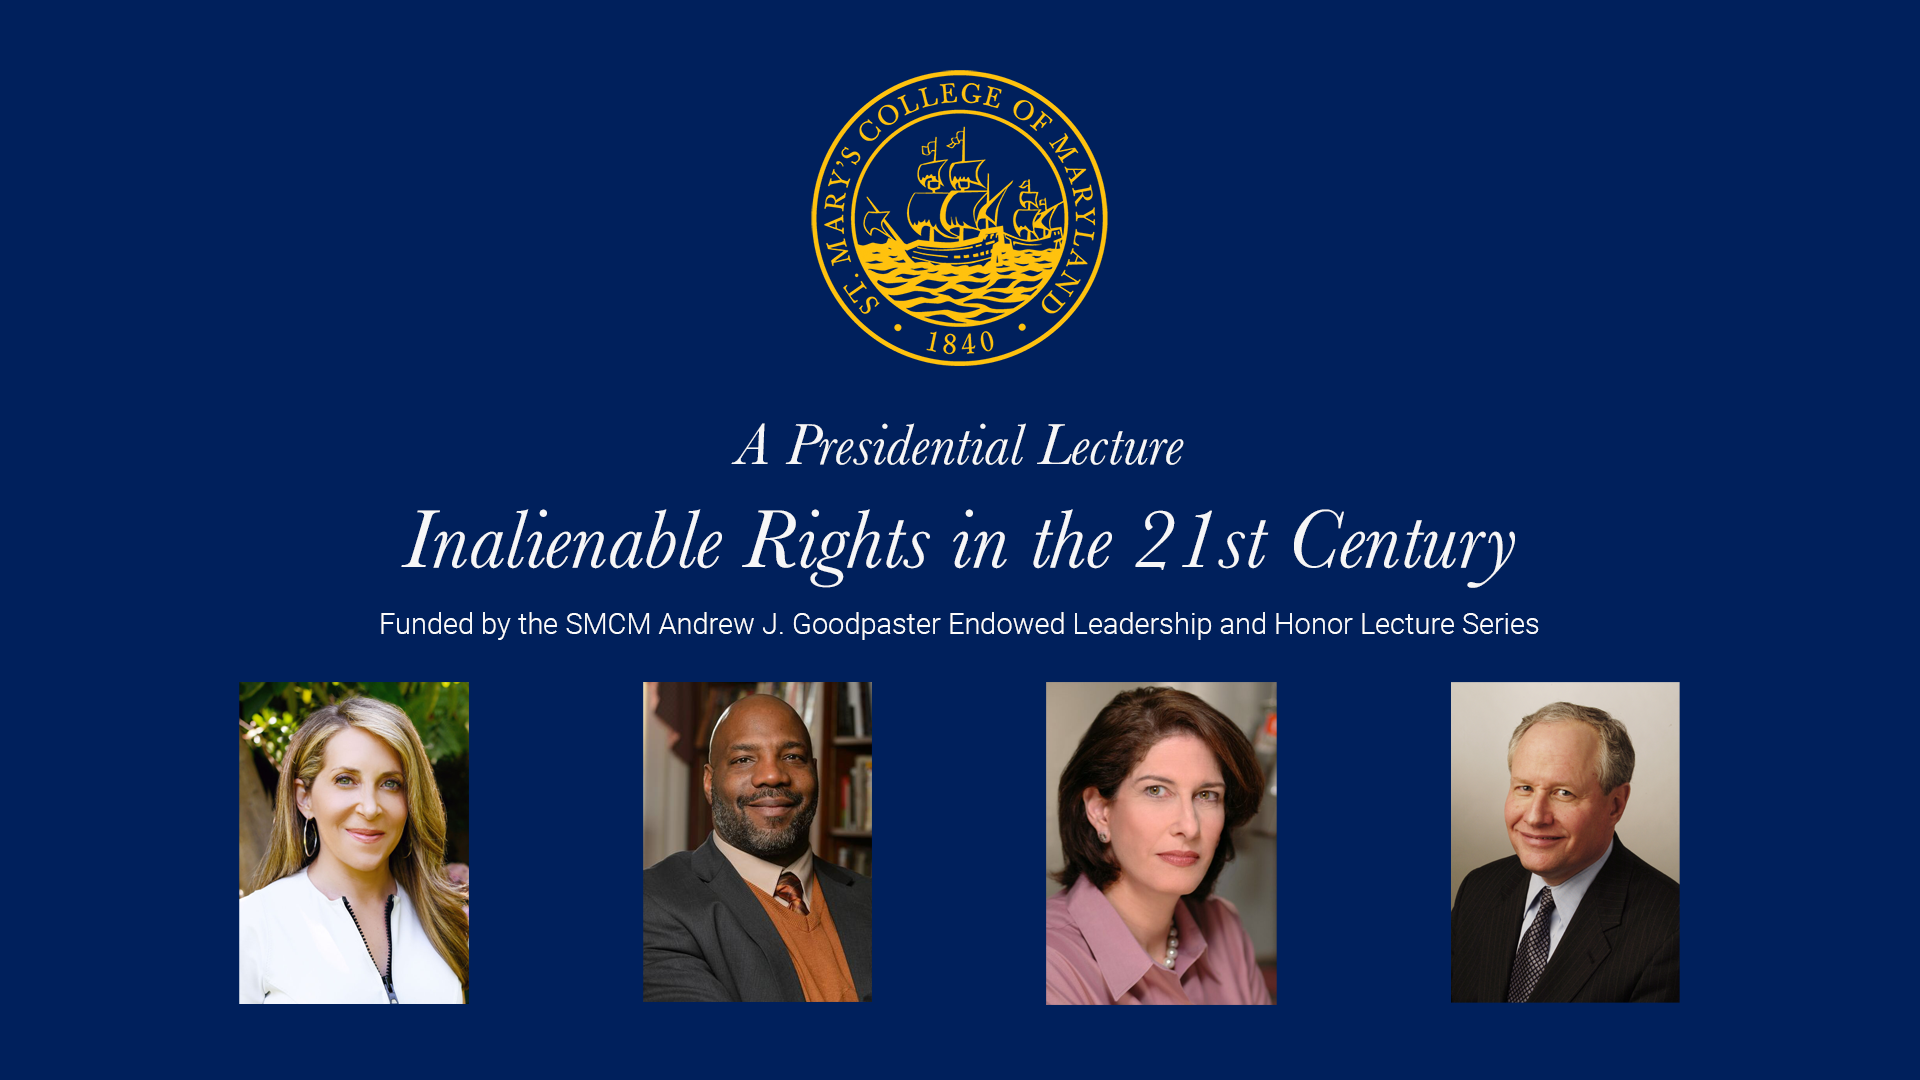 A Presidential Lecture: Inalienable Rights in the 21st Century - Funded by the Andrew J. Goodpaster Endowed Leadership and Honor Lecture Series (photos of Jessica Yellin, Jelani Cobb, Mara Liasson, and Bill Kristol)